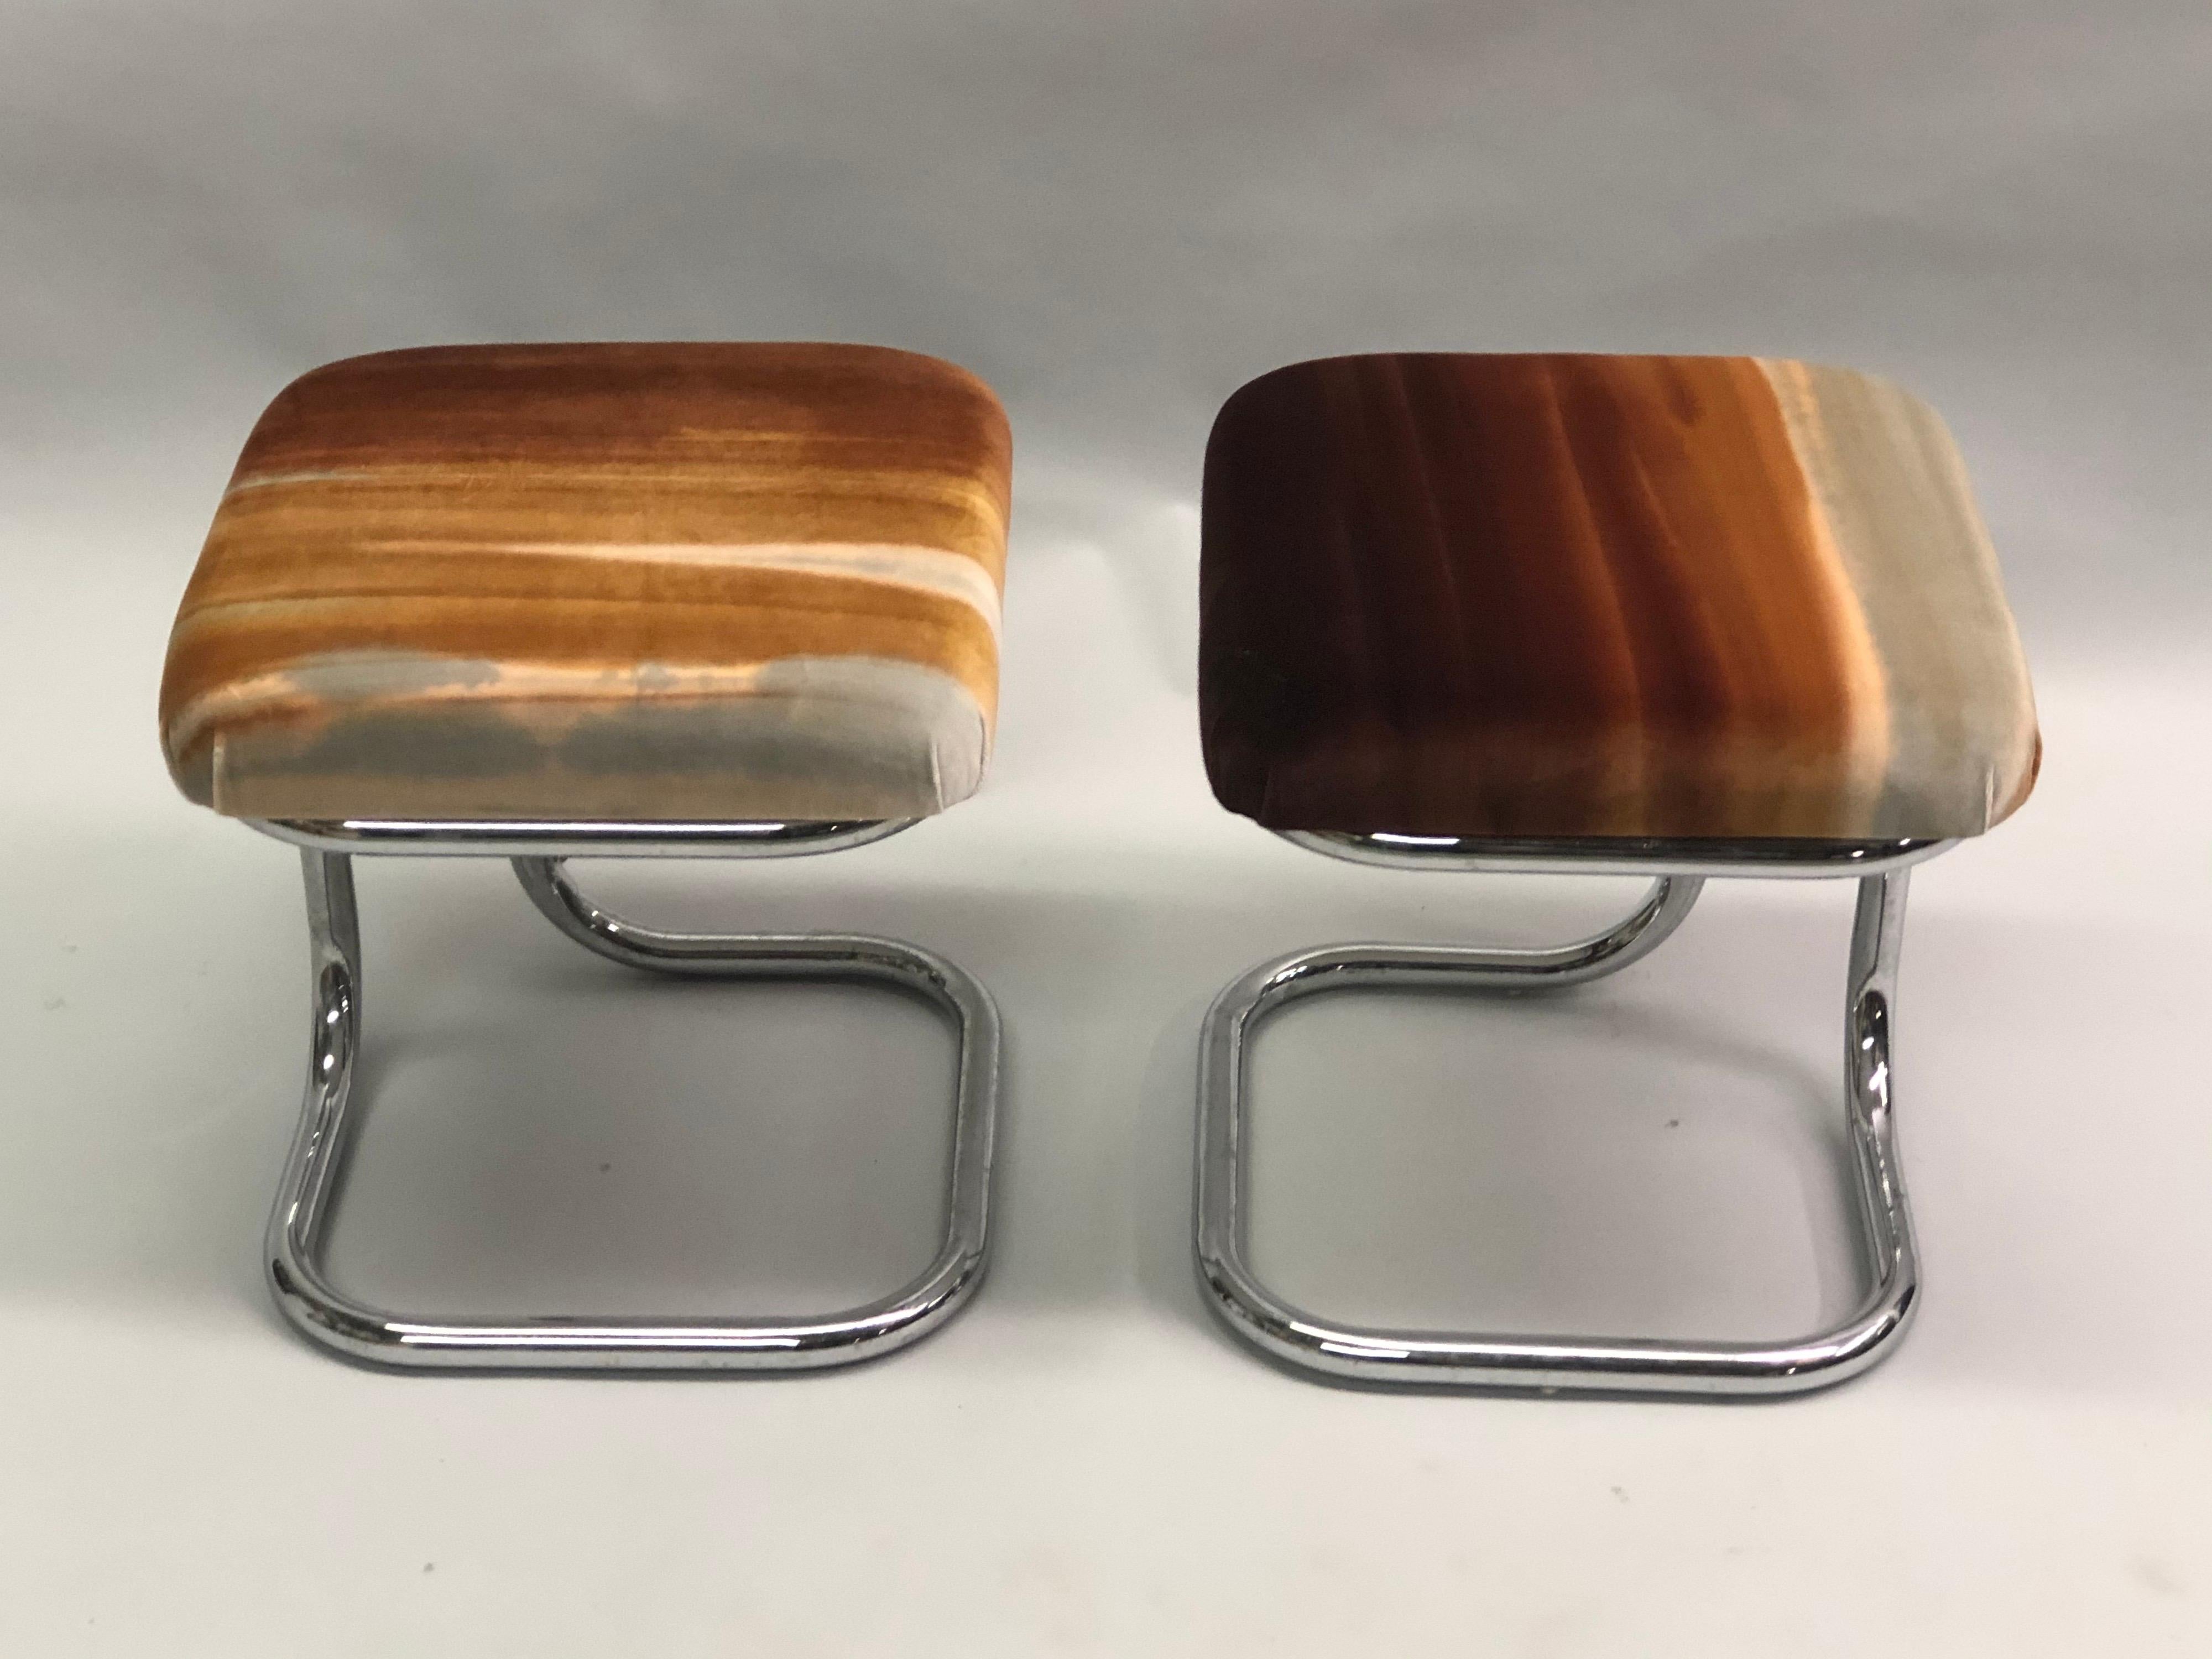 Pair of French Modernist ‘Bauhaus’ Stools with Upholstered Seats by Hermès In Good Condition For Sale In New York, NY